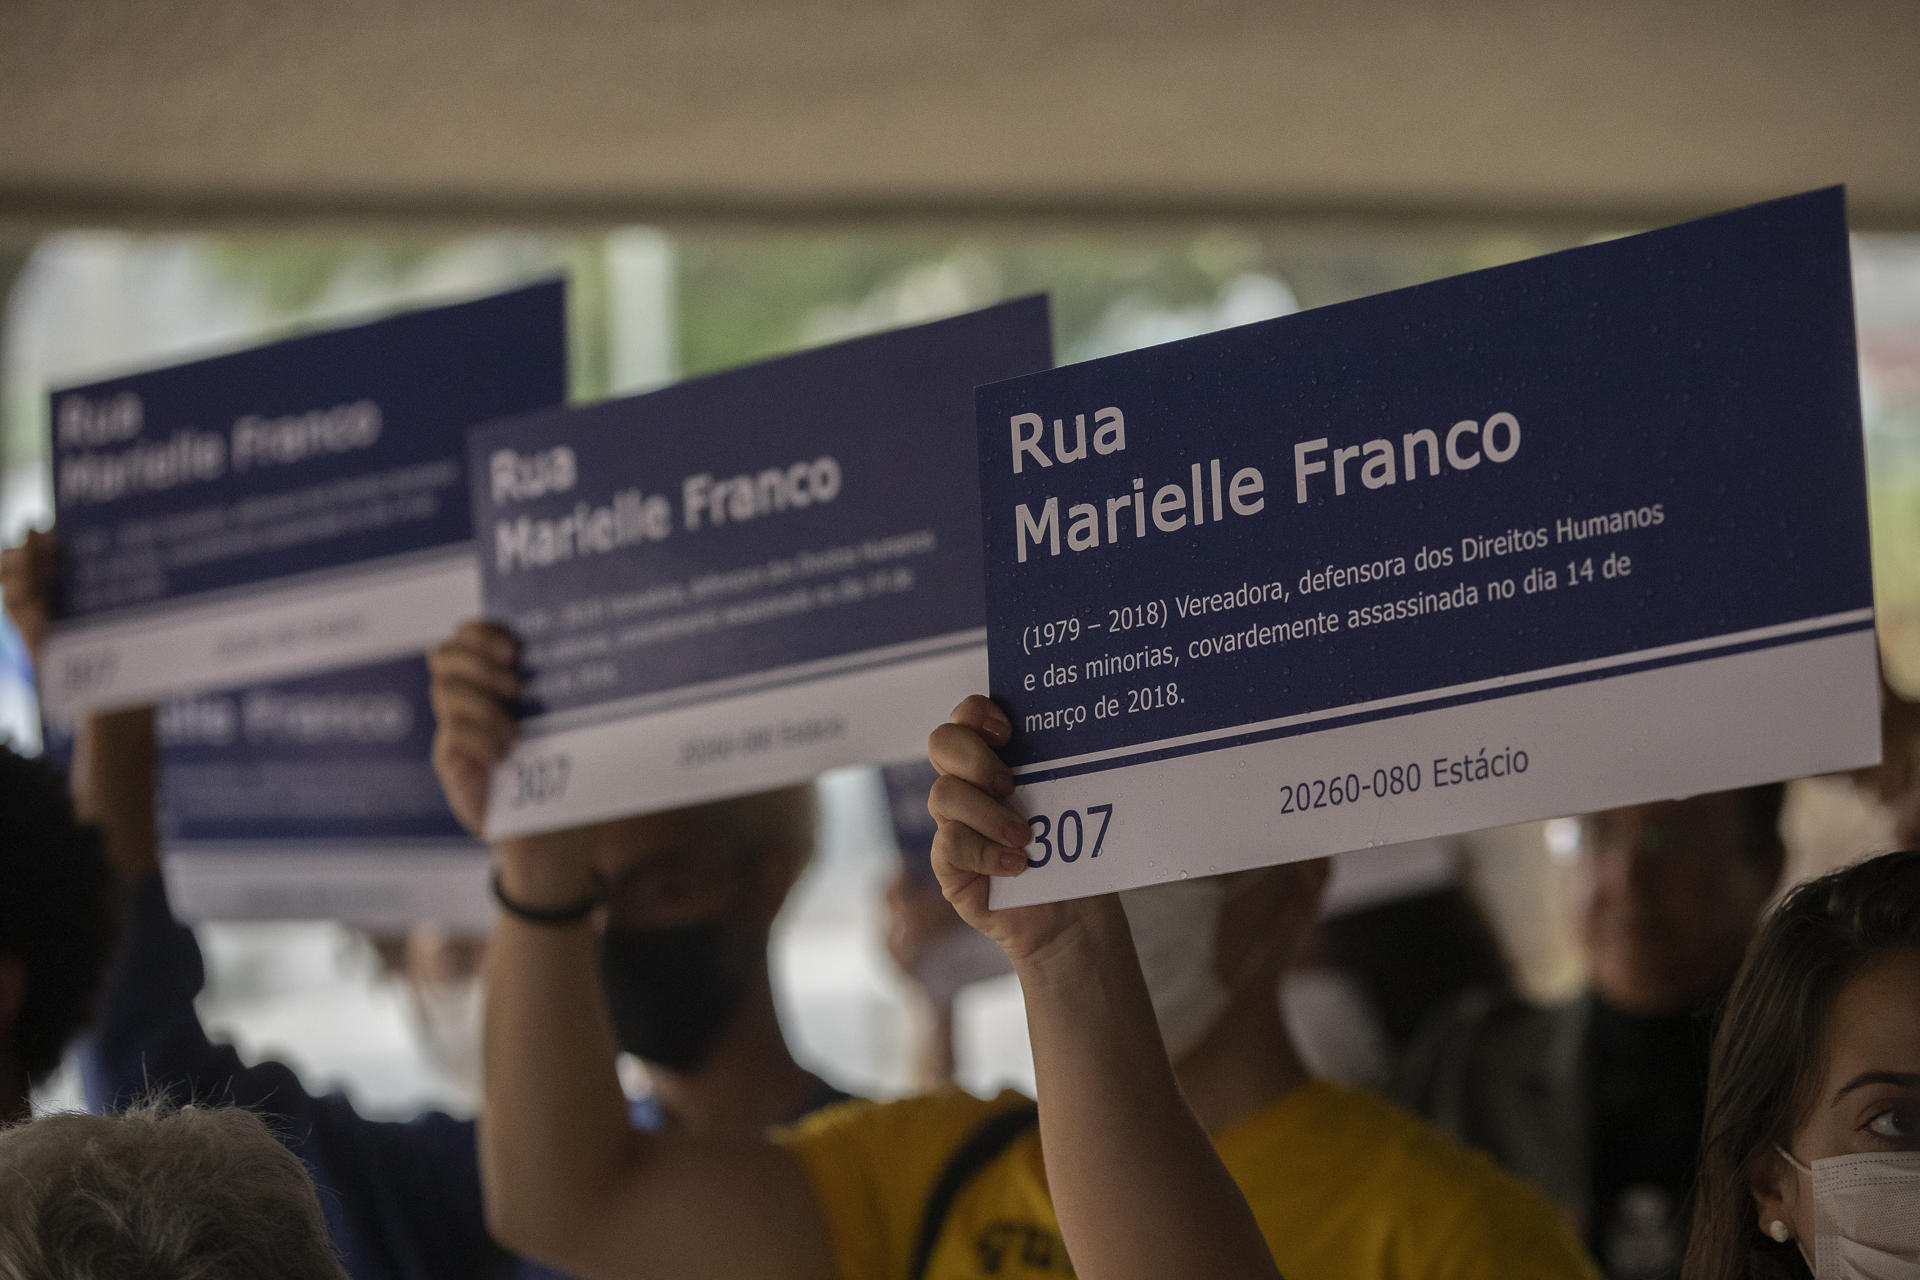 Activists demand justice in the case of the March 14, 2018, assassination of Rio de Janeiro councilwoman and human rights advocate Marielle Franco. EFE/ Joedson Alves